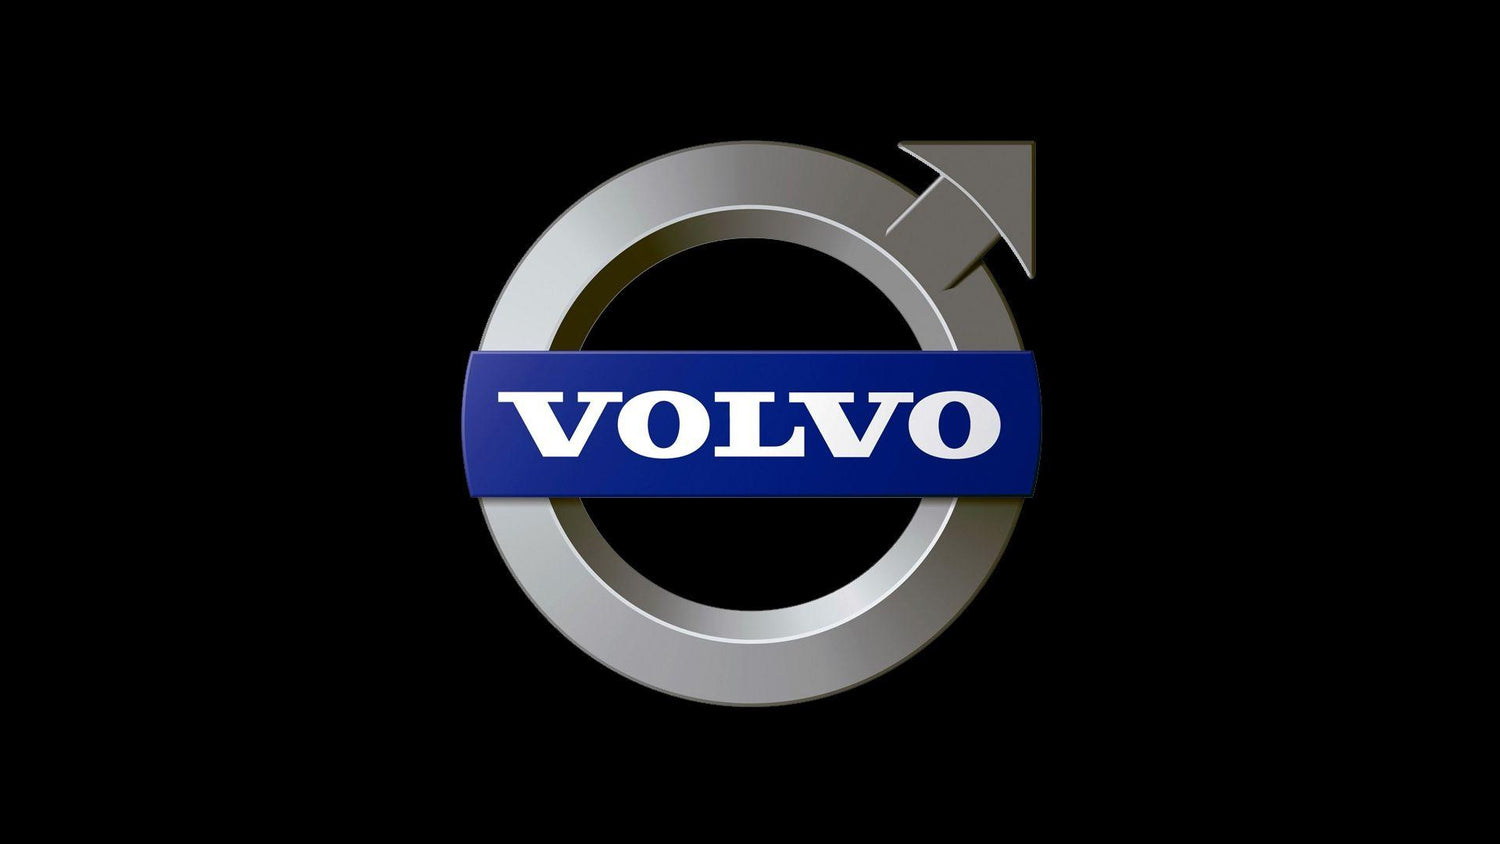 Volvo | Electric Car Charger EV Cables for Vovlo type 1, 2 and Portable Charging Cables